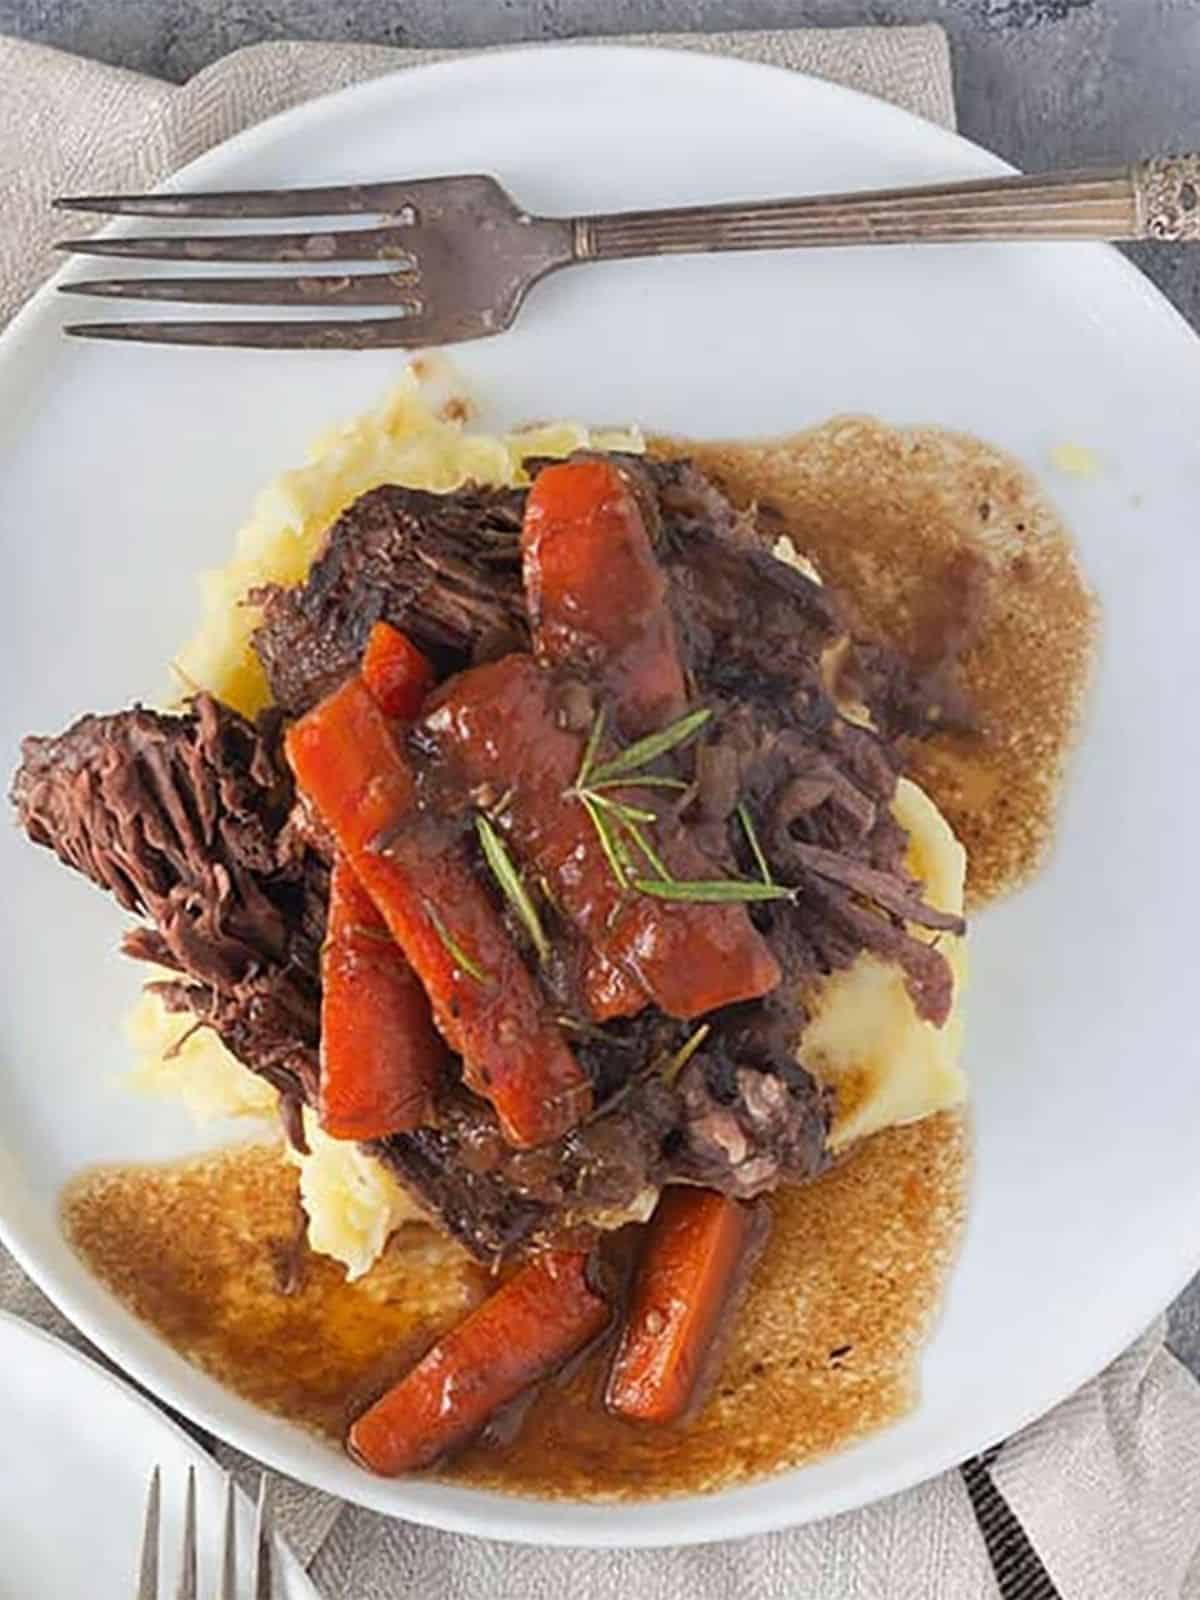 Pot roast over mashed potatoes with gravy and carrots.